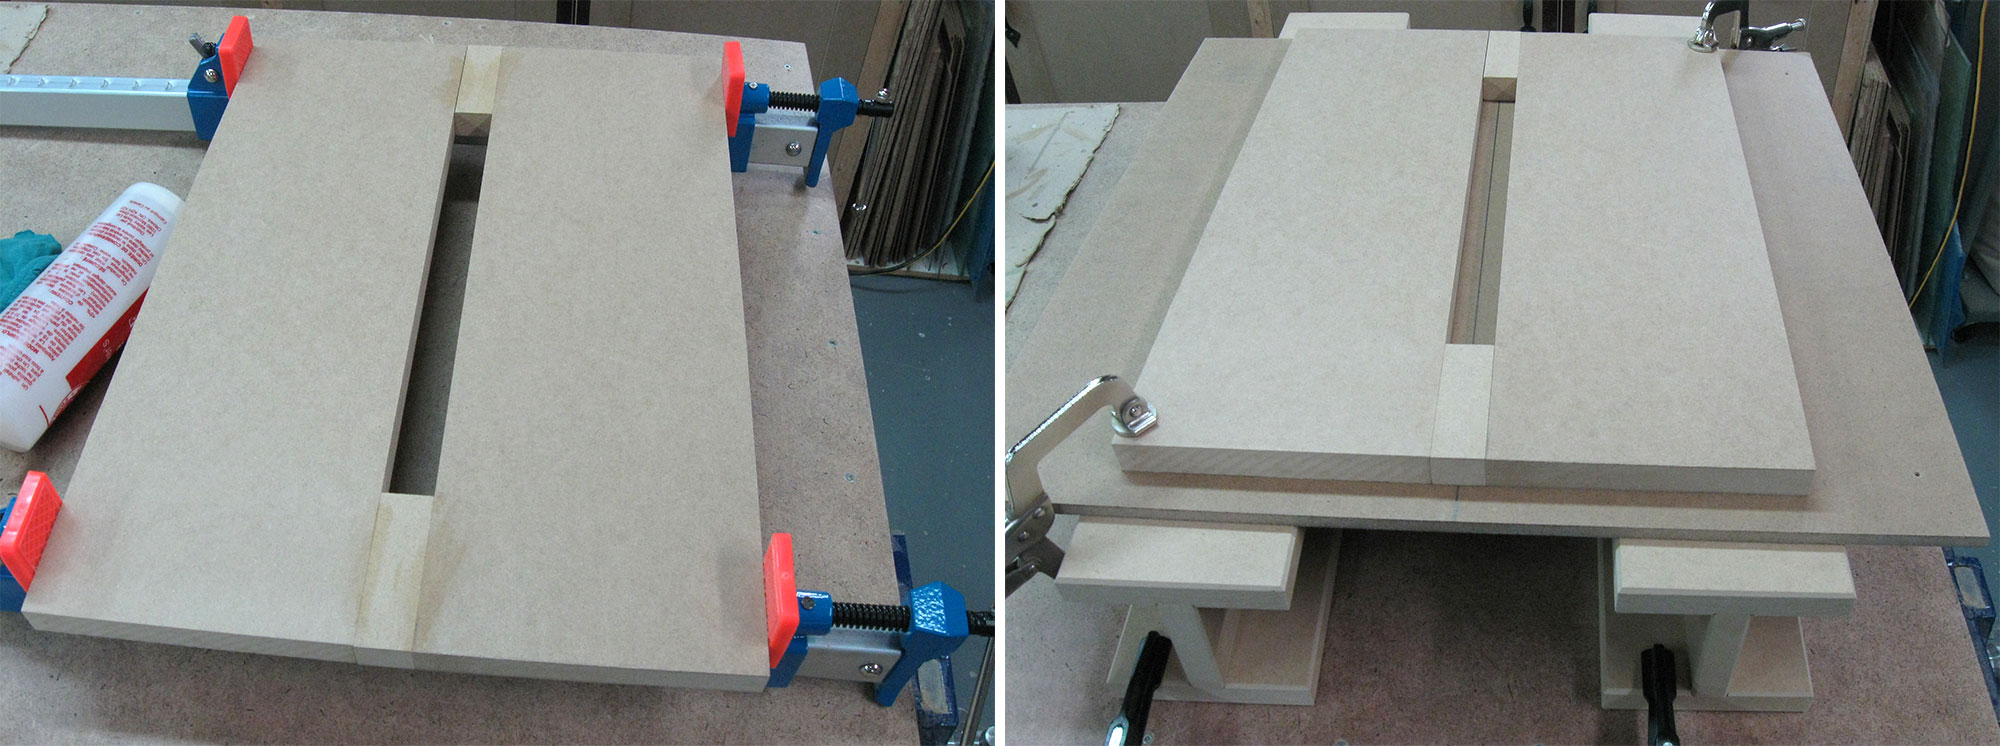 Left: Assembling the parts for the template. Right: The template clamped in place and ready to route.